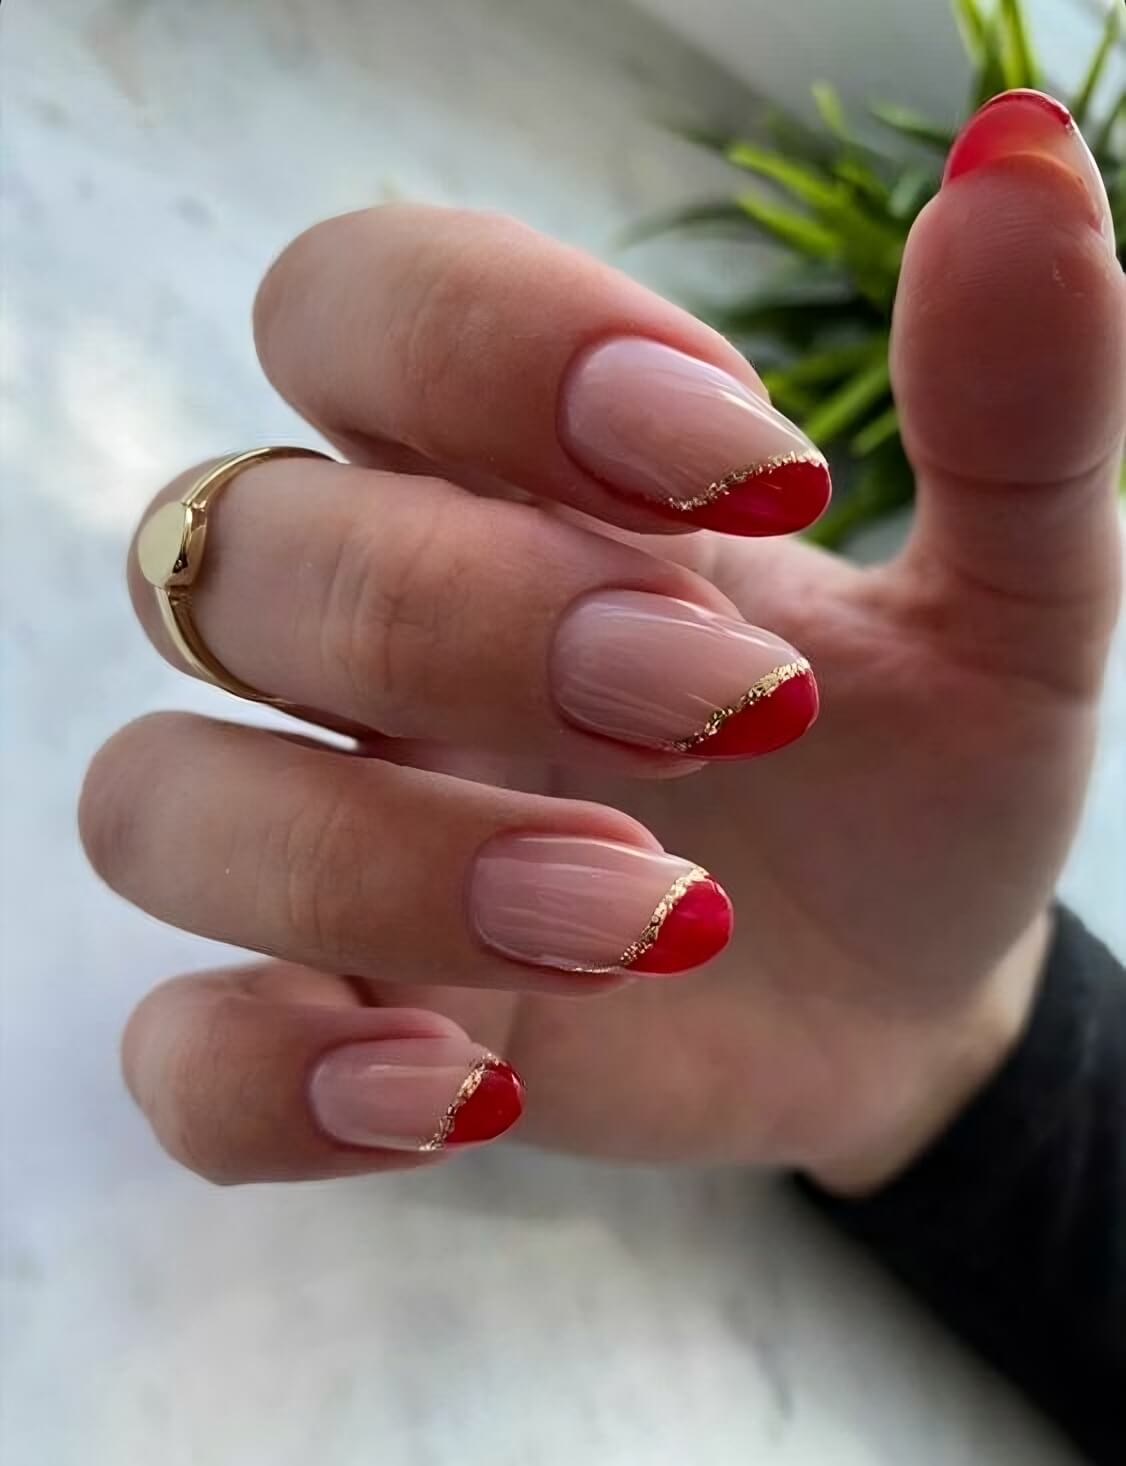 30 One-Of-A-Kind Red Nail Designs To Impress Anybody - 243